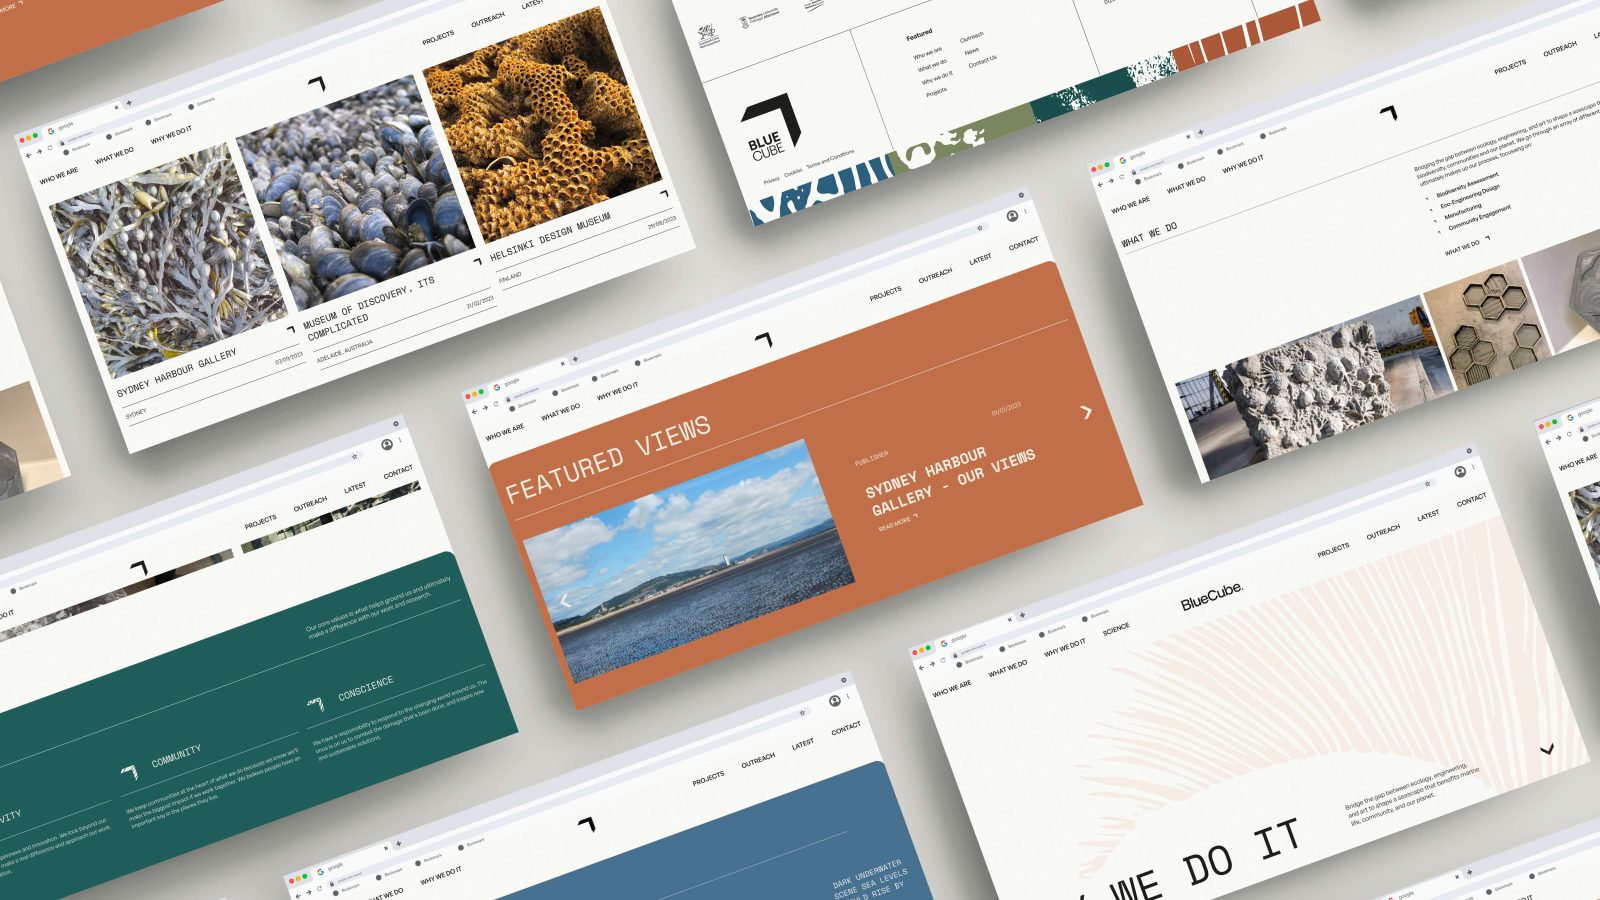 Array of brand design mockups displayed in a grid, featuring various color schemes and layouts, including images, charts, and text content.